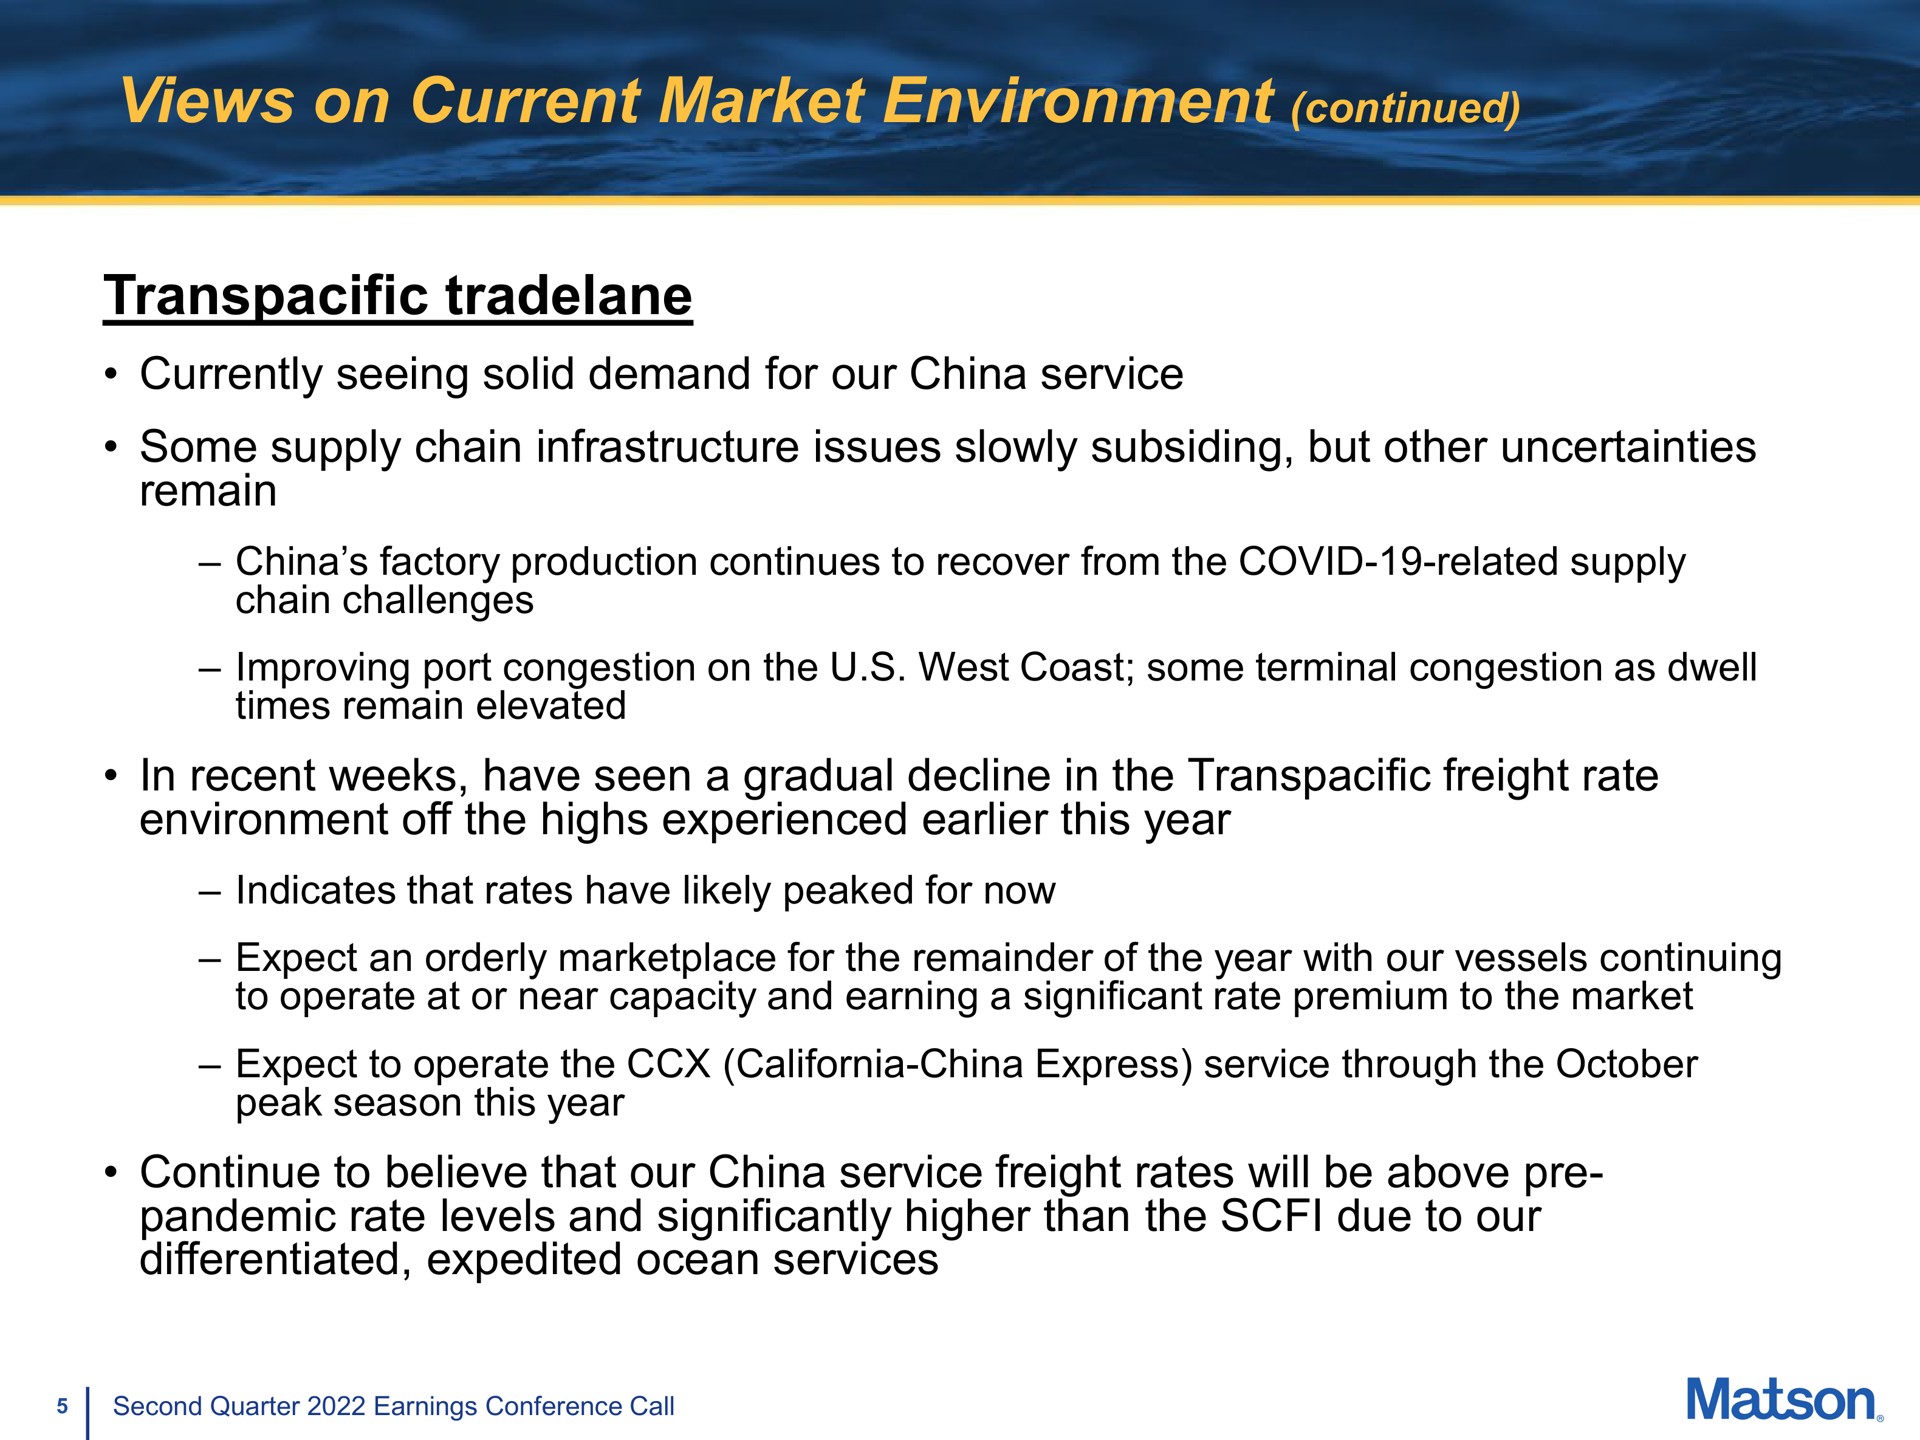 views on current market environment continued transpacific currently seeing solid demand for our china service some supply chain infrastructure issues slowly subsiding but other uncertainties remain in recent weeks have seen a gradual decline in the transpacific freight rate environment off the highs experienced this year continue to believe that our china service freight rates will be above pandemic rate levels and significantly higher than the due to our differentiated expedited ocean services | Matson